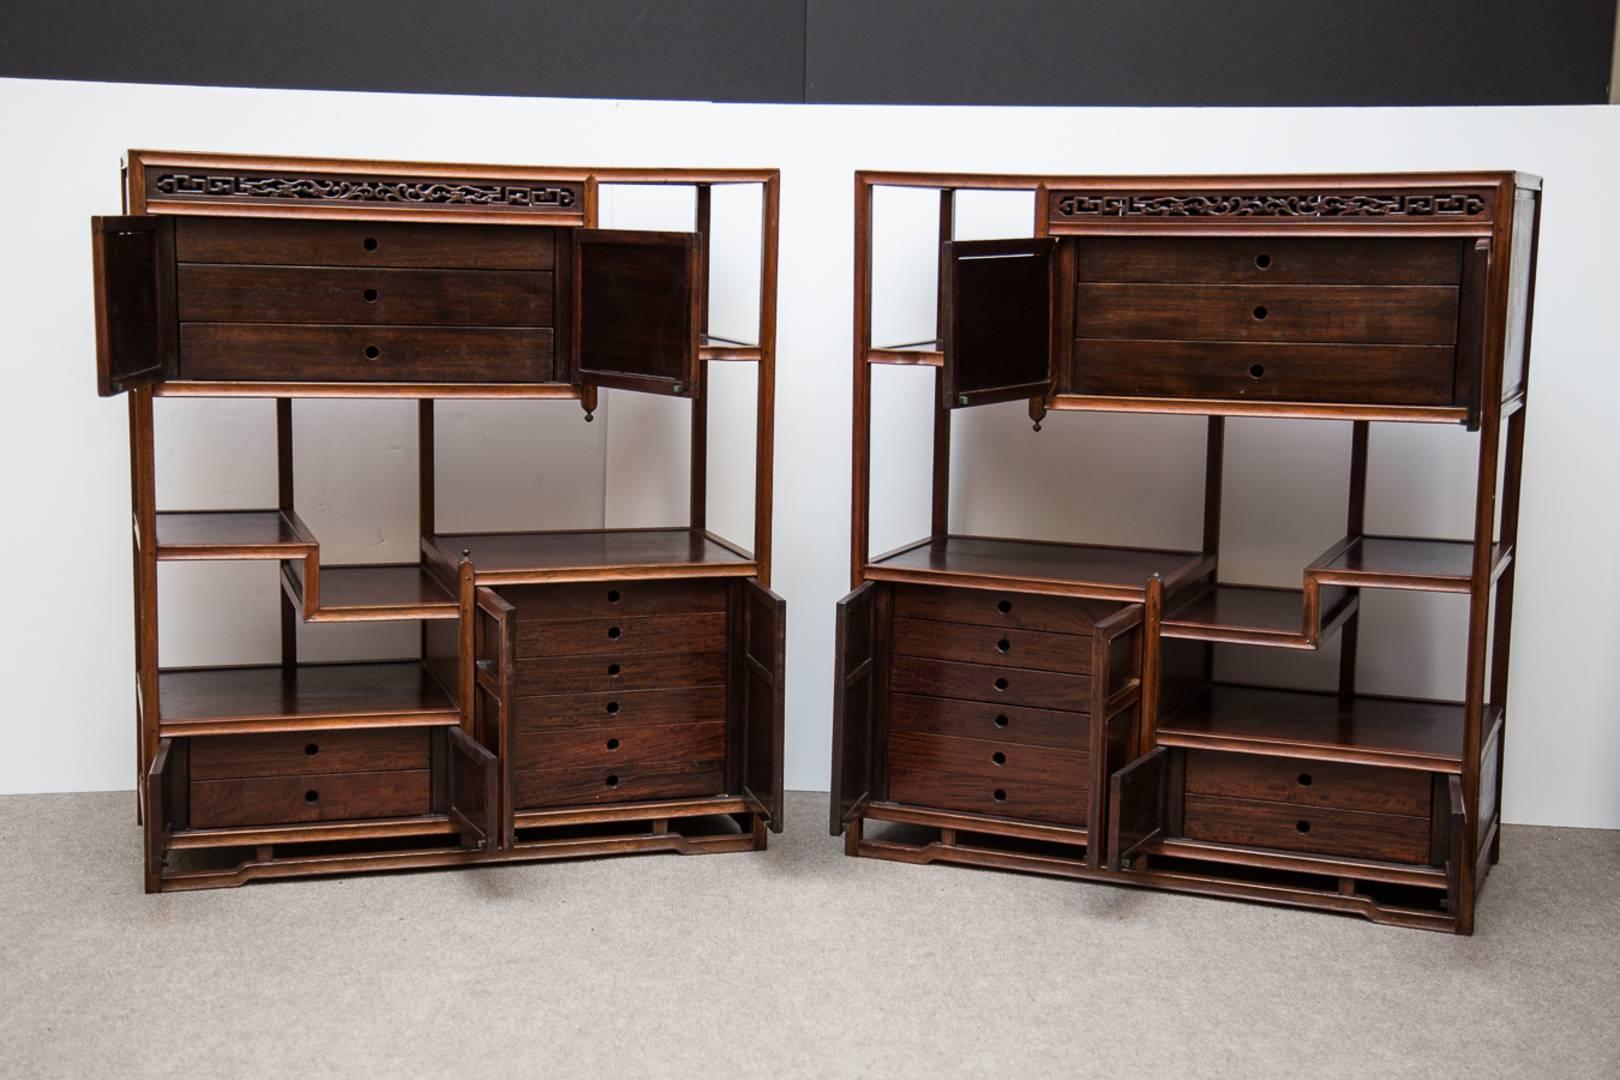 Pair of Japanese Tansu Cha cabinets. Finely made. Teakwood. Multi drawer. Late Meiji period.